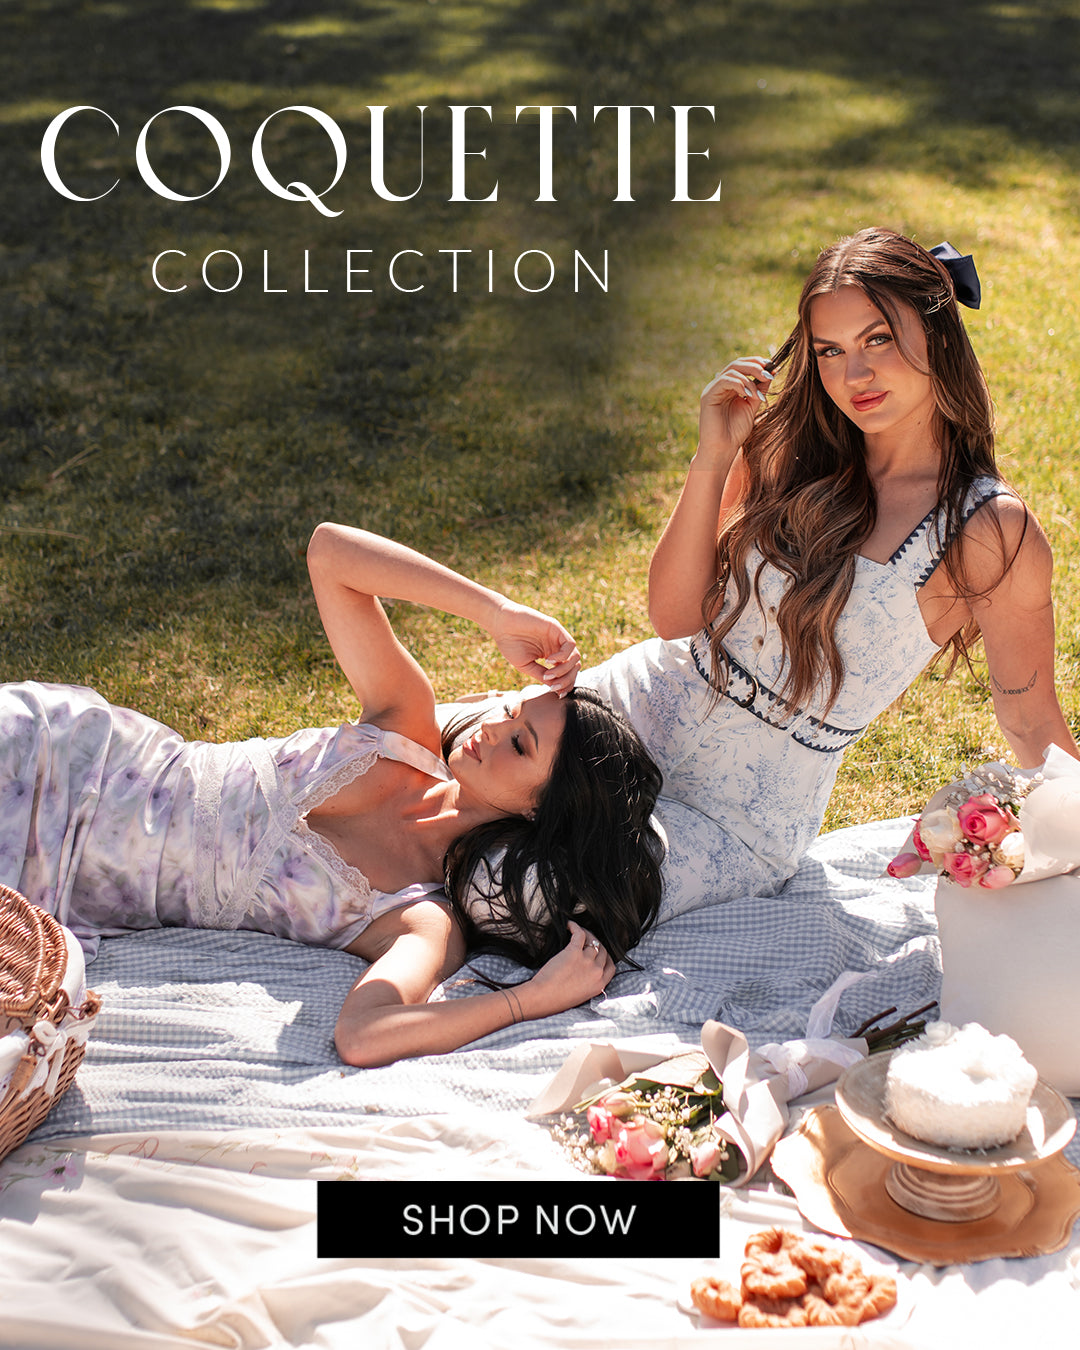 Coquette Collection. Photos of models wearing floral jumpsuits and dresses in a sunny afternoon picnic scene.  Call to Action says "shop now" and links to the Coquette Collection.